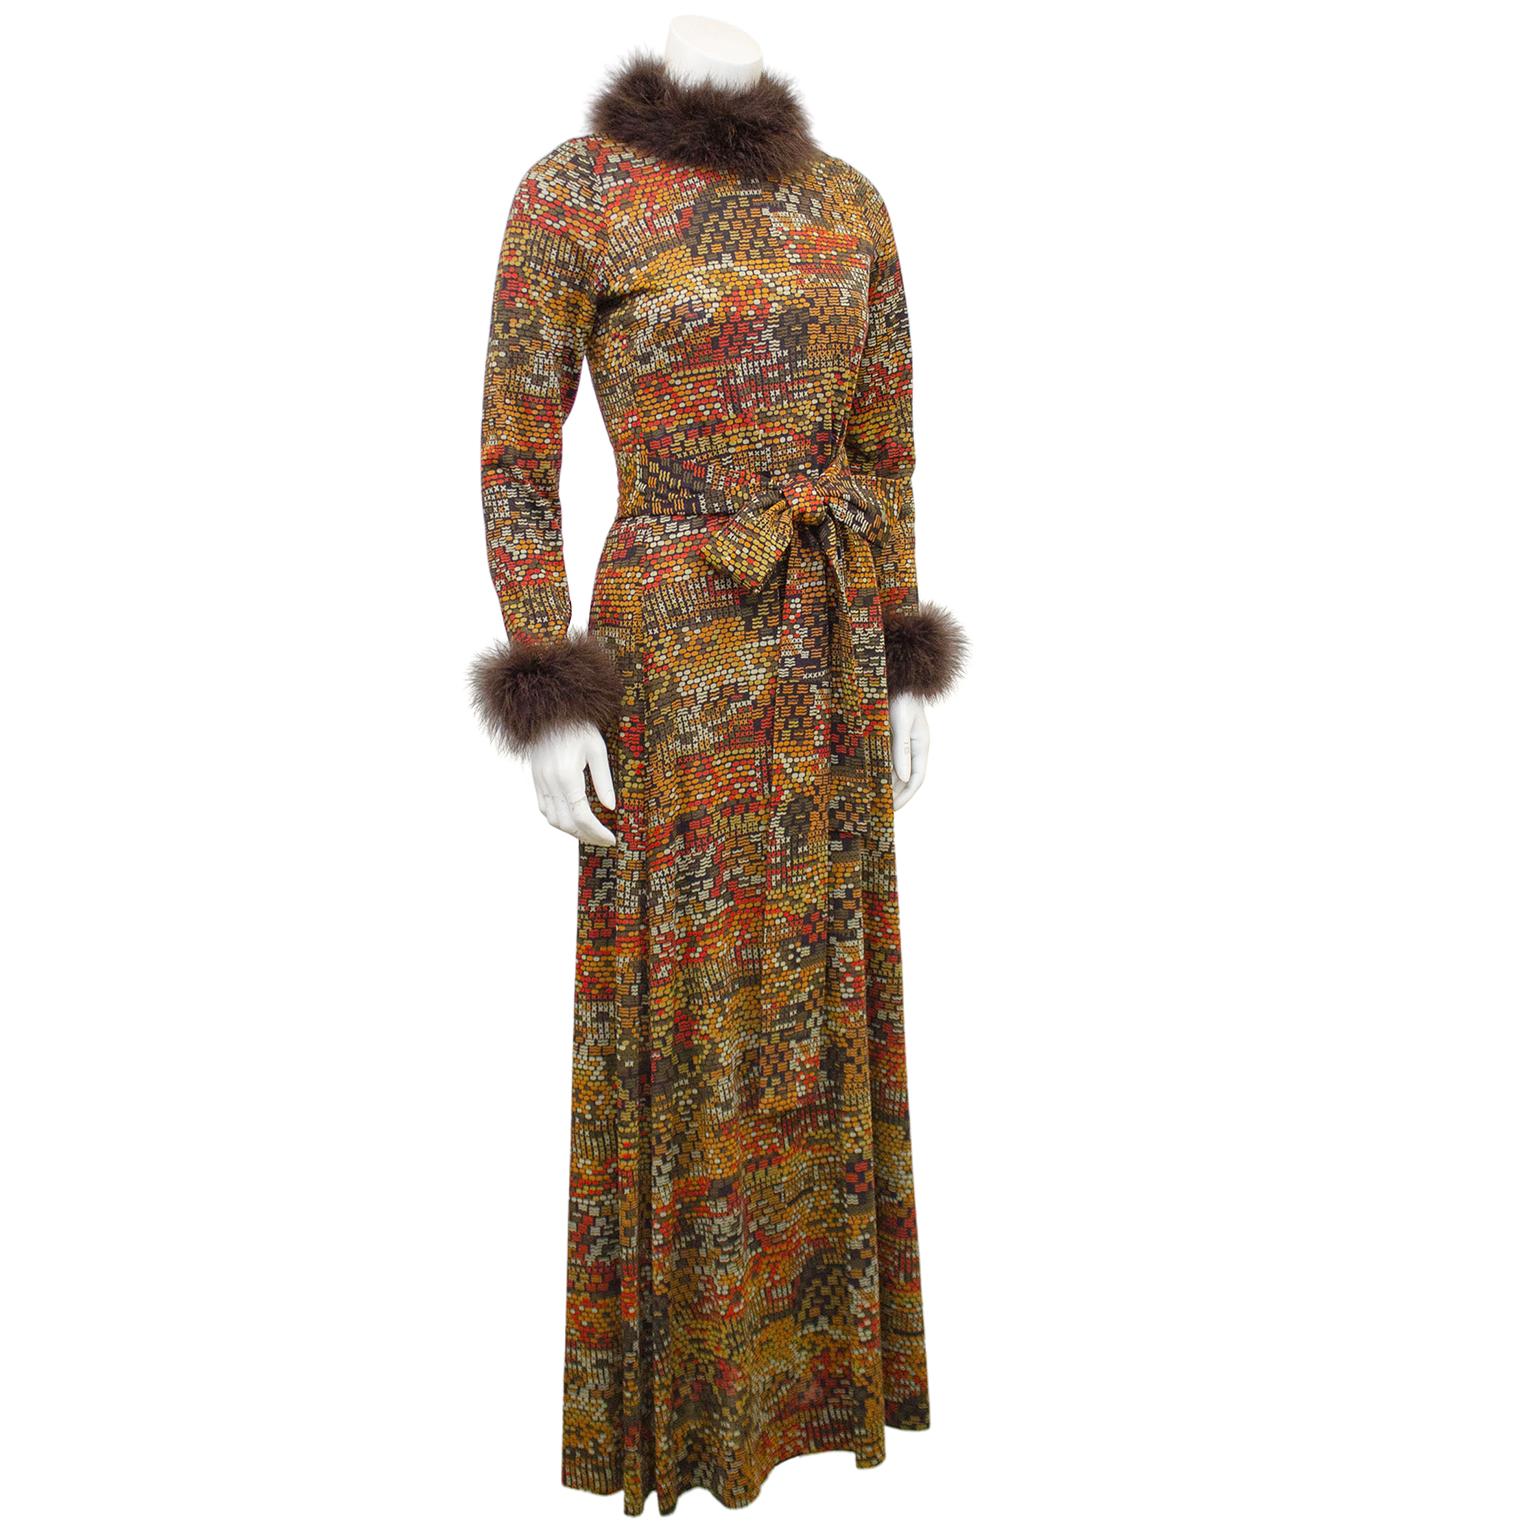 1970s jersey hostess gown from Italian designer Valditevere. Brown with an allover mid century modern print in shades of orange and beige. Long sleeves with brown marabou trim at neck and wrists. Optional waist belt. Invisible zipper up centre back.